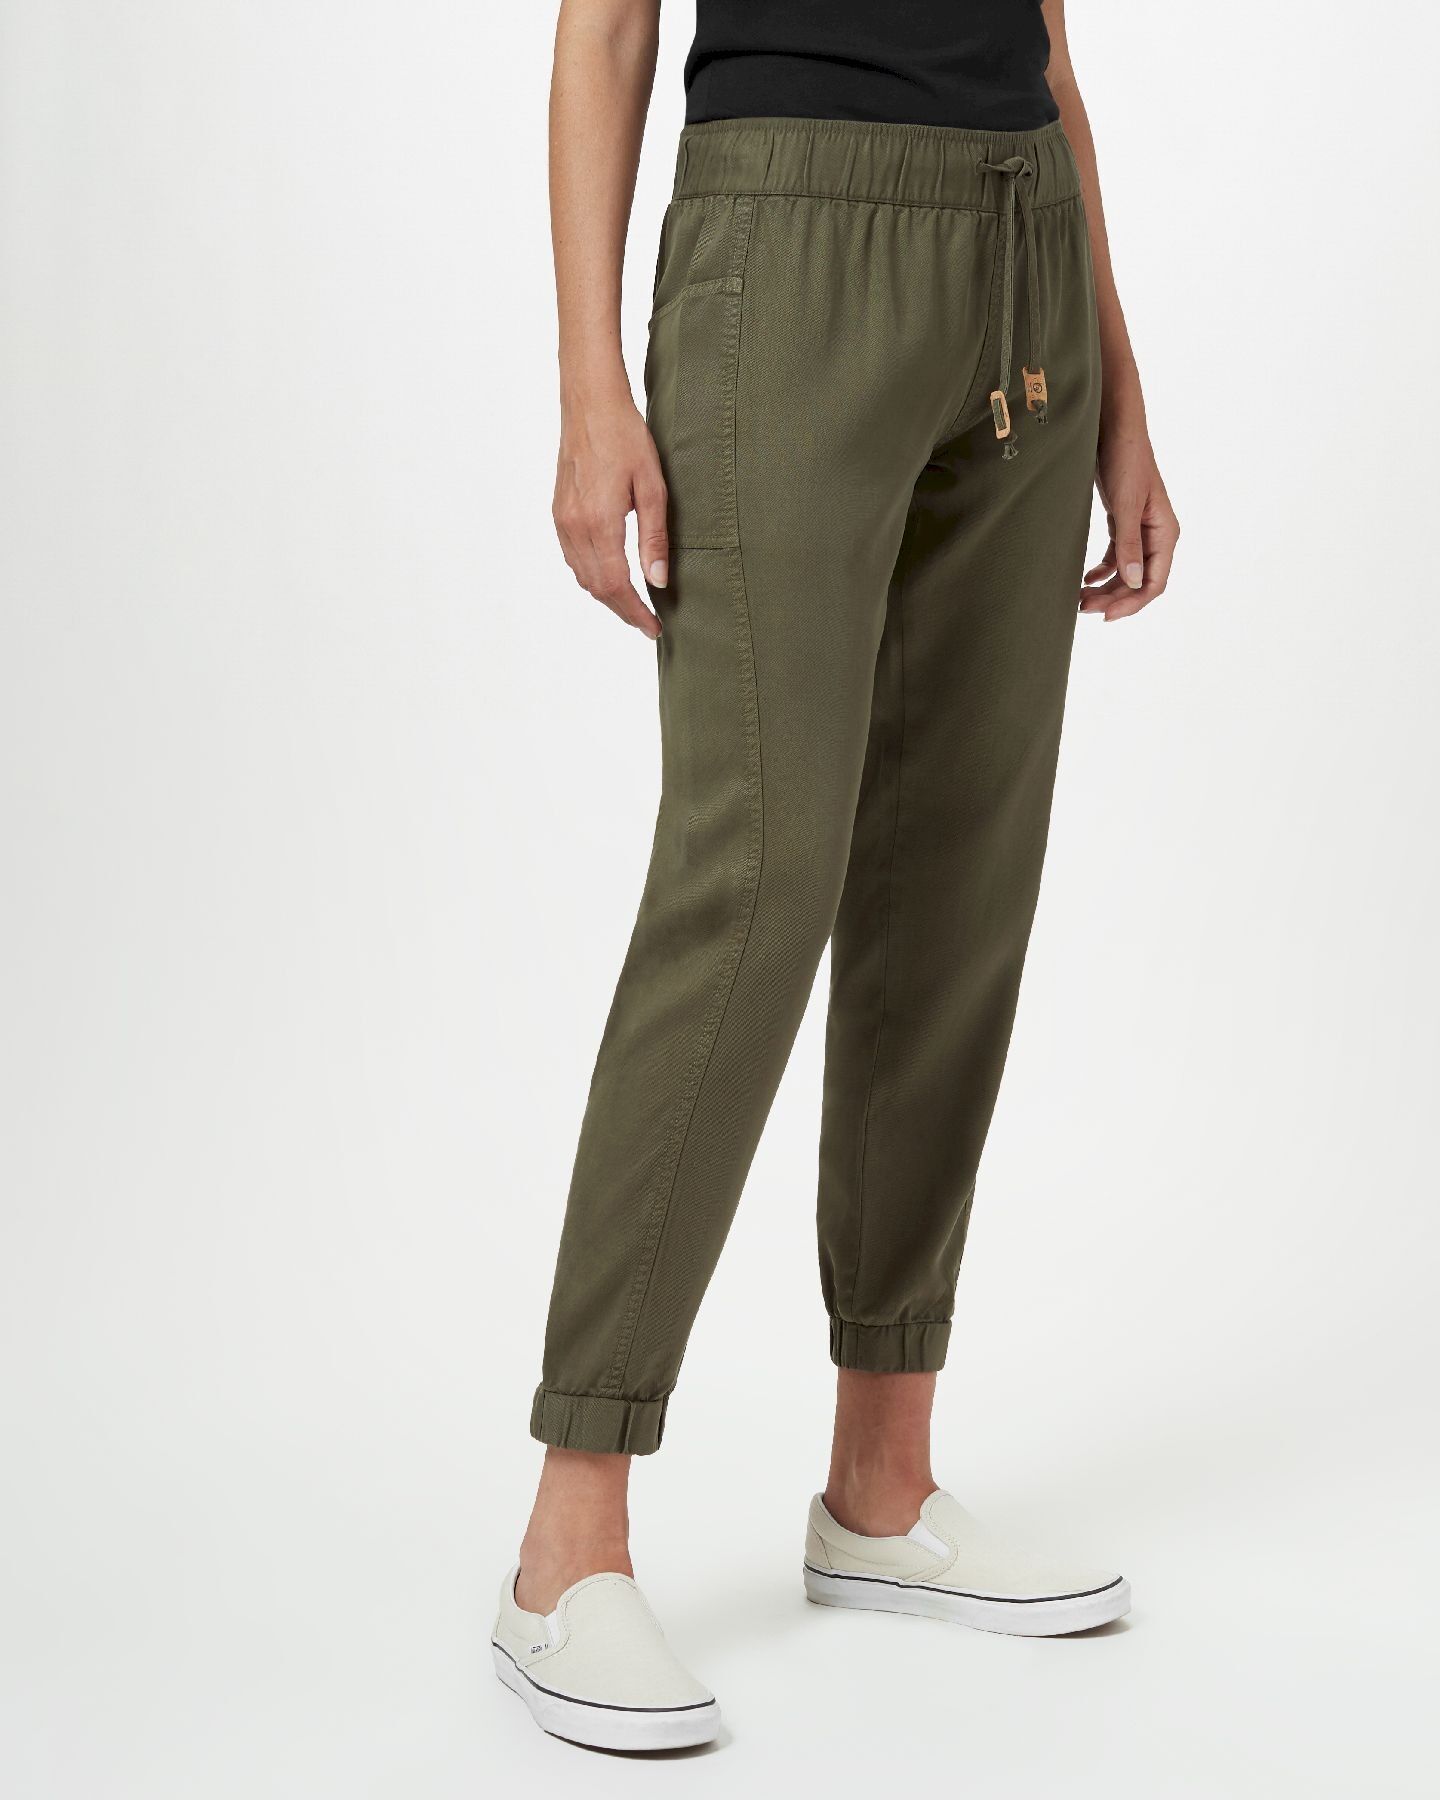 Tentree Colwood Pant - Walking trousers - Women's